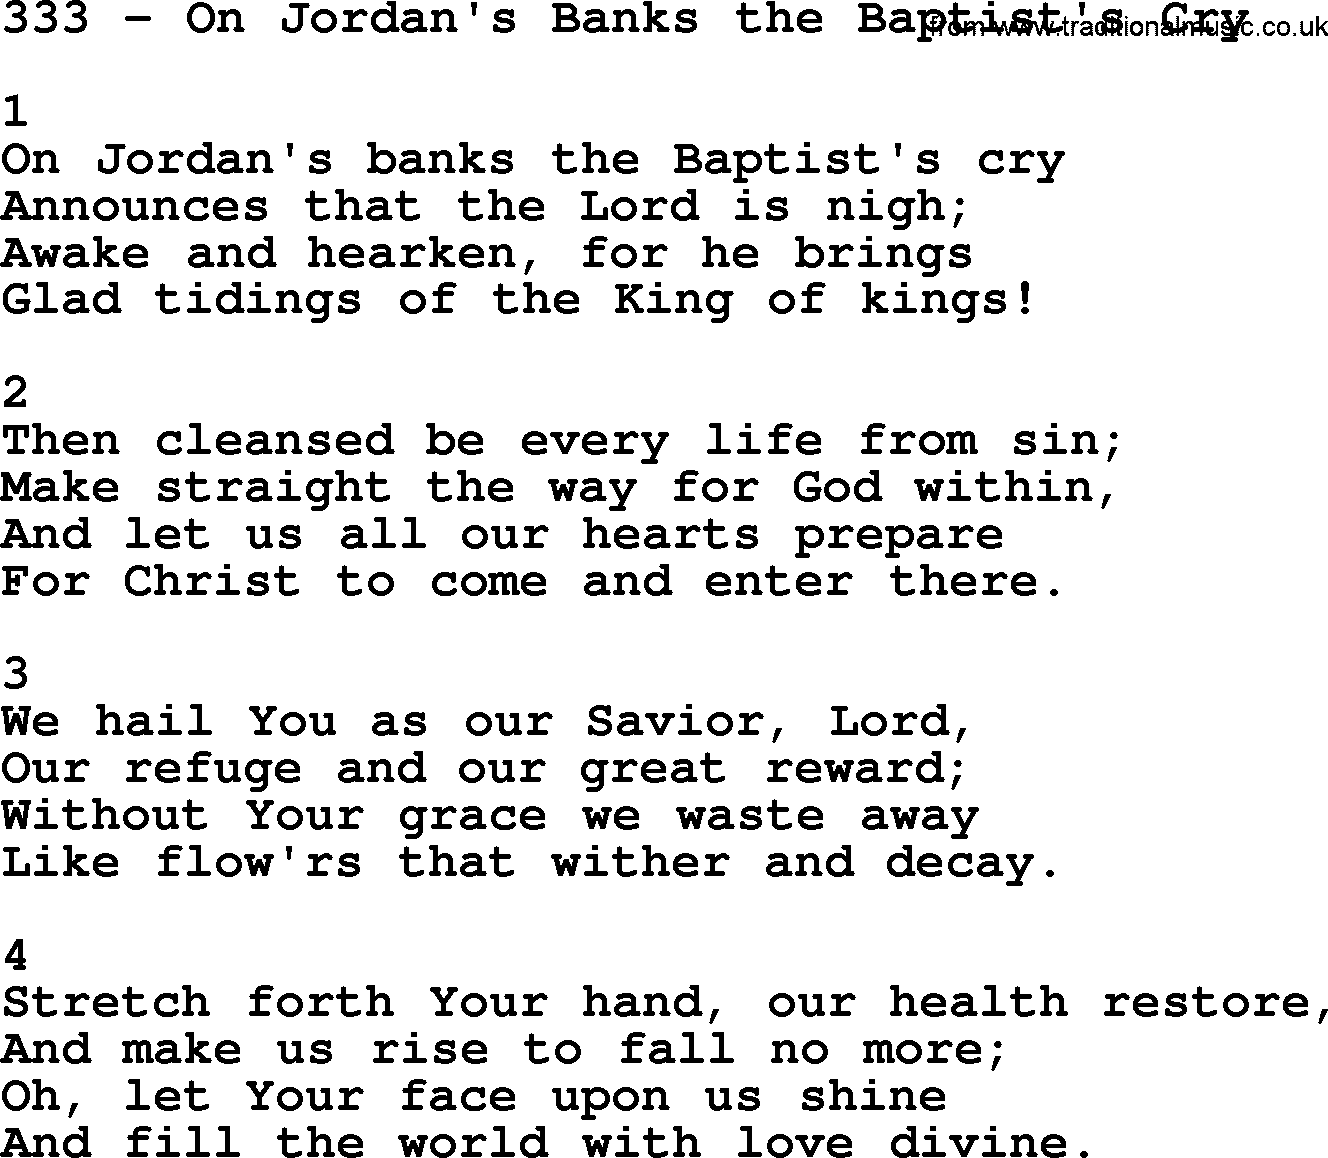 Complete Adventis Hymnal, title: 333-On Jordan's Banks The Baptist's Cry, with lyrics, midi, mp3, powerpoints(PPT) and PDF,